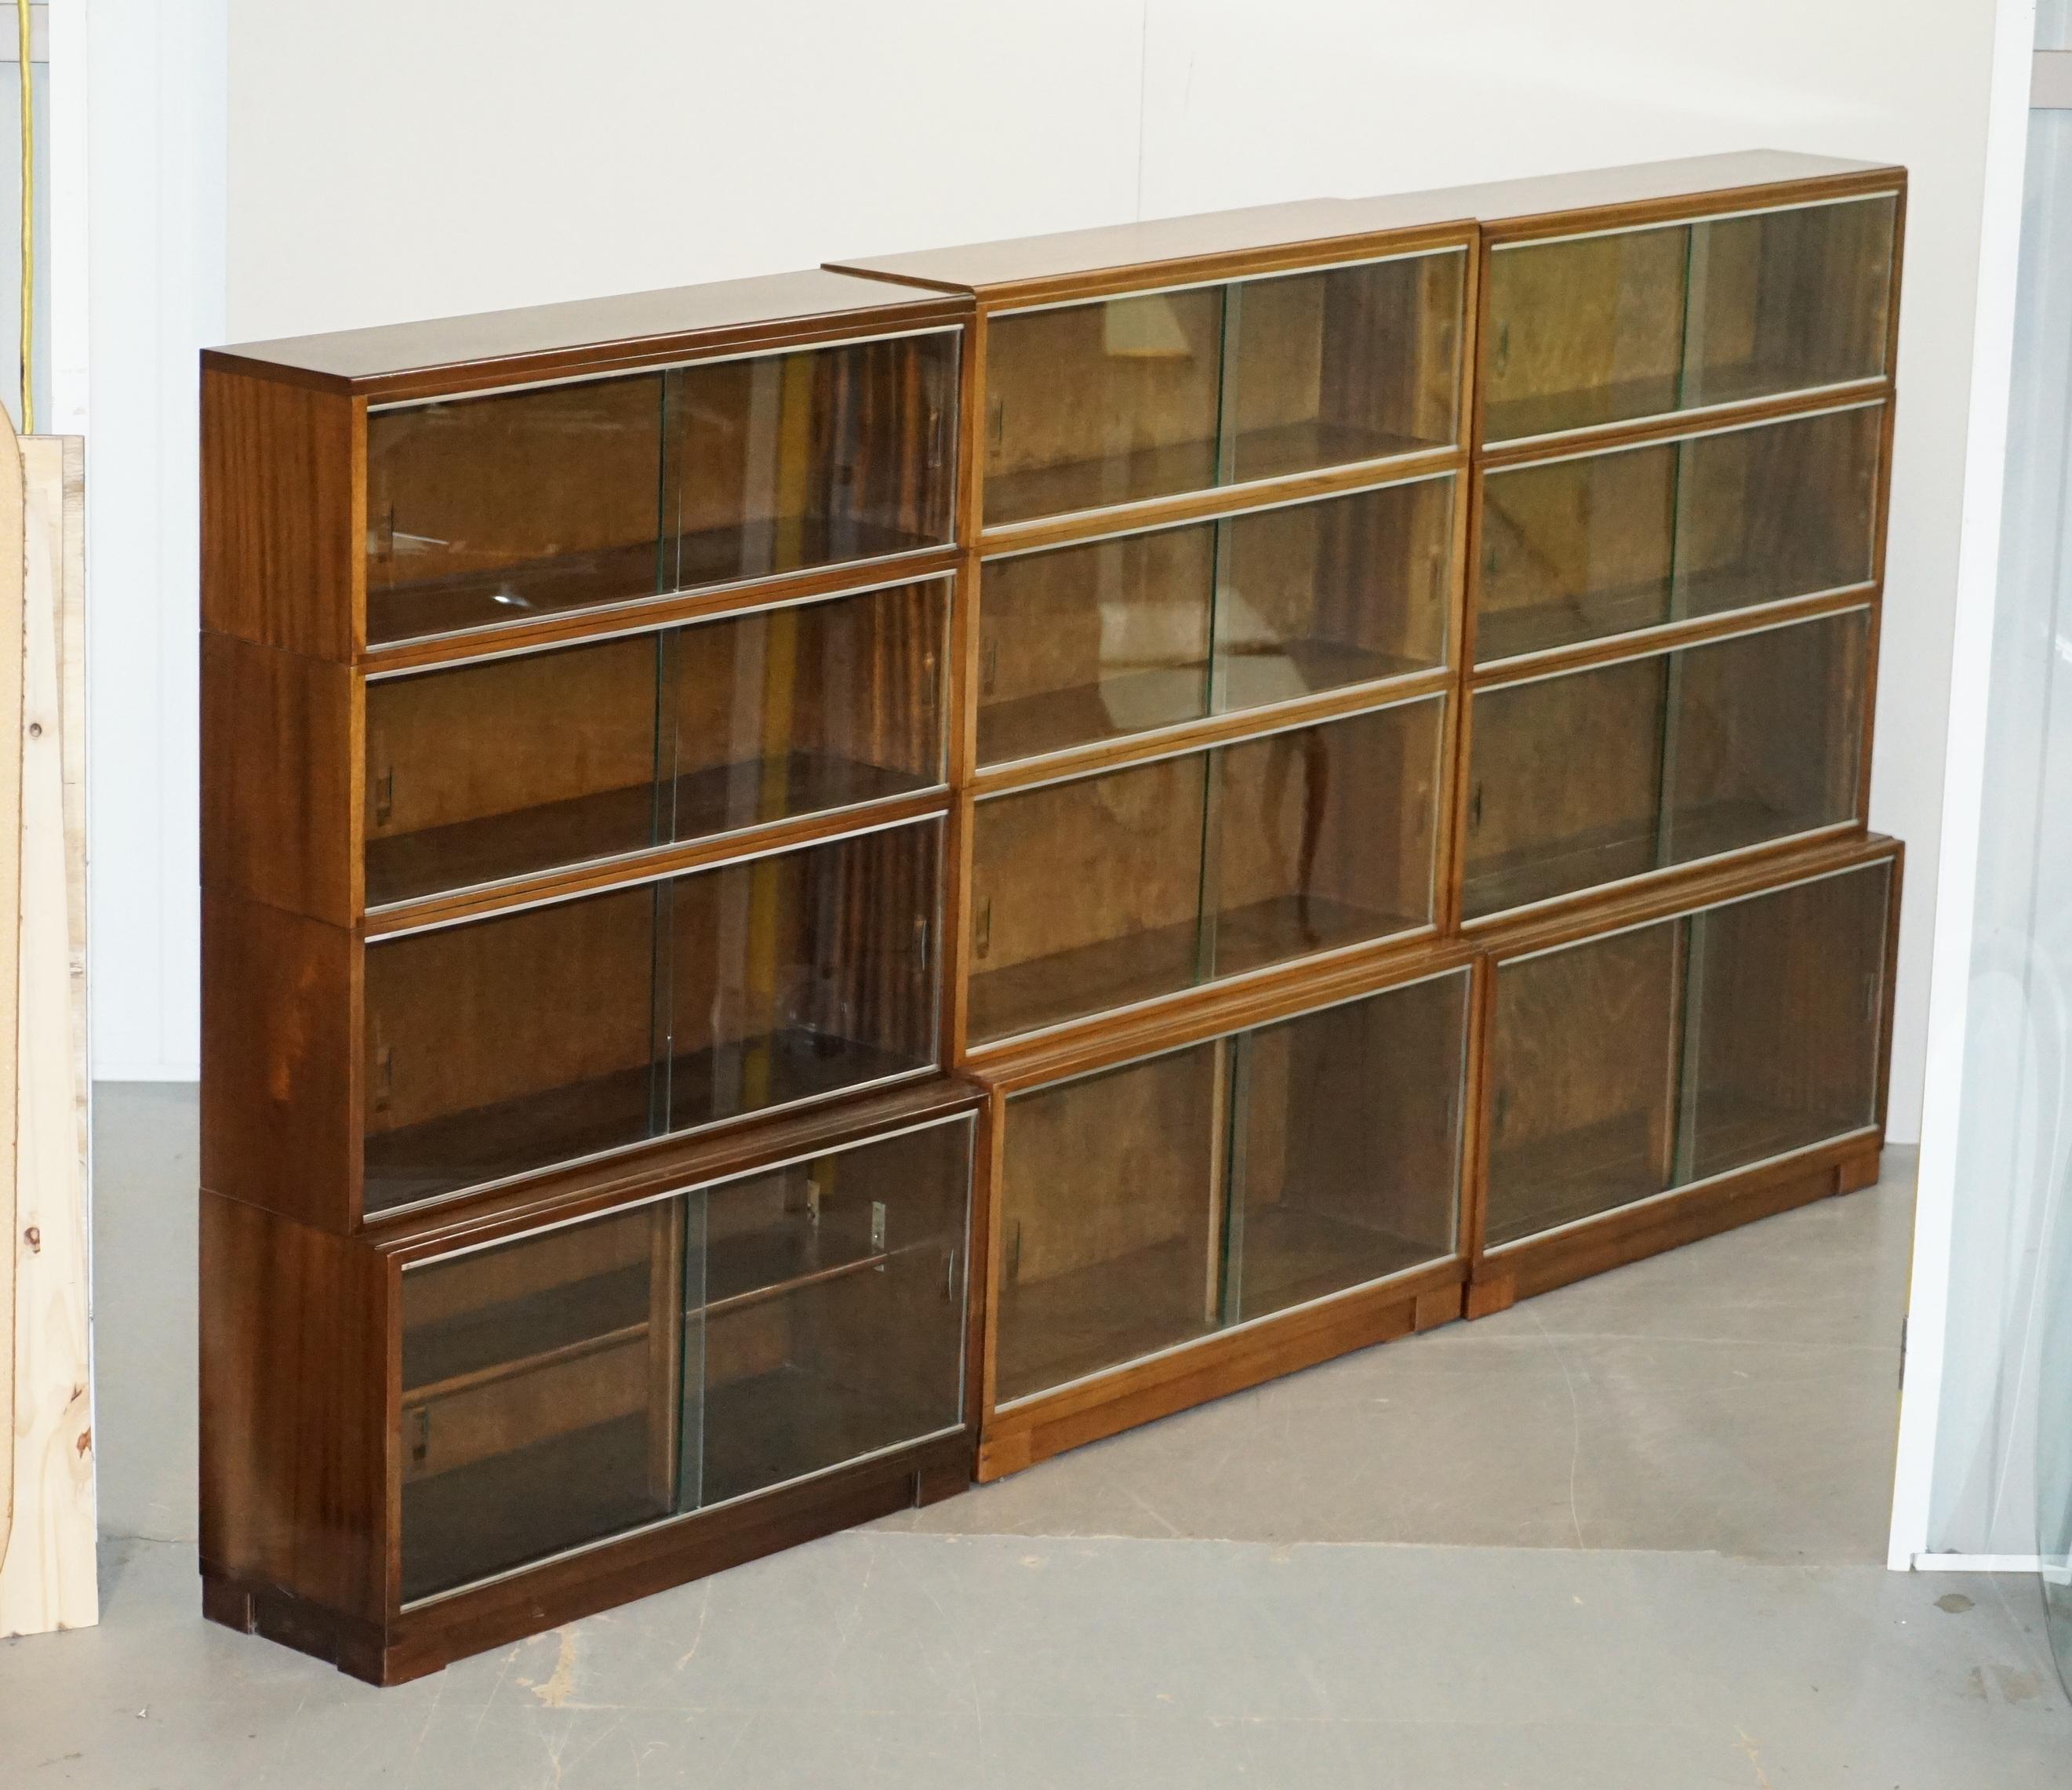 We are delighted to this stunning suite of three Minty Oxford Legal modular stacking bookcases with glass sliding doors

A good looking well-made and versatile set, modular bookcases break down into different sections so you can adjust the height